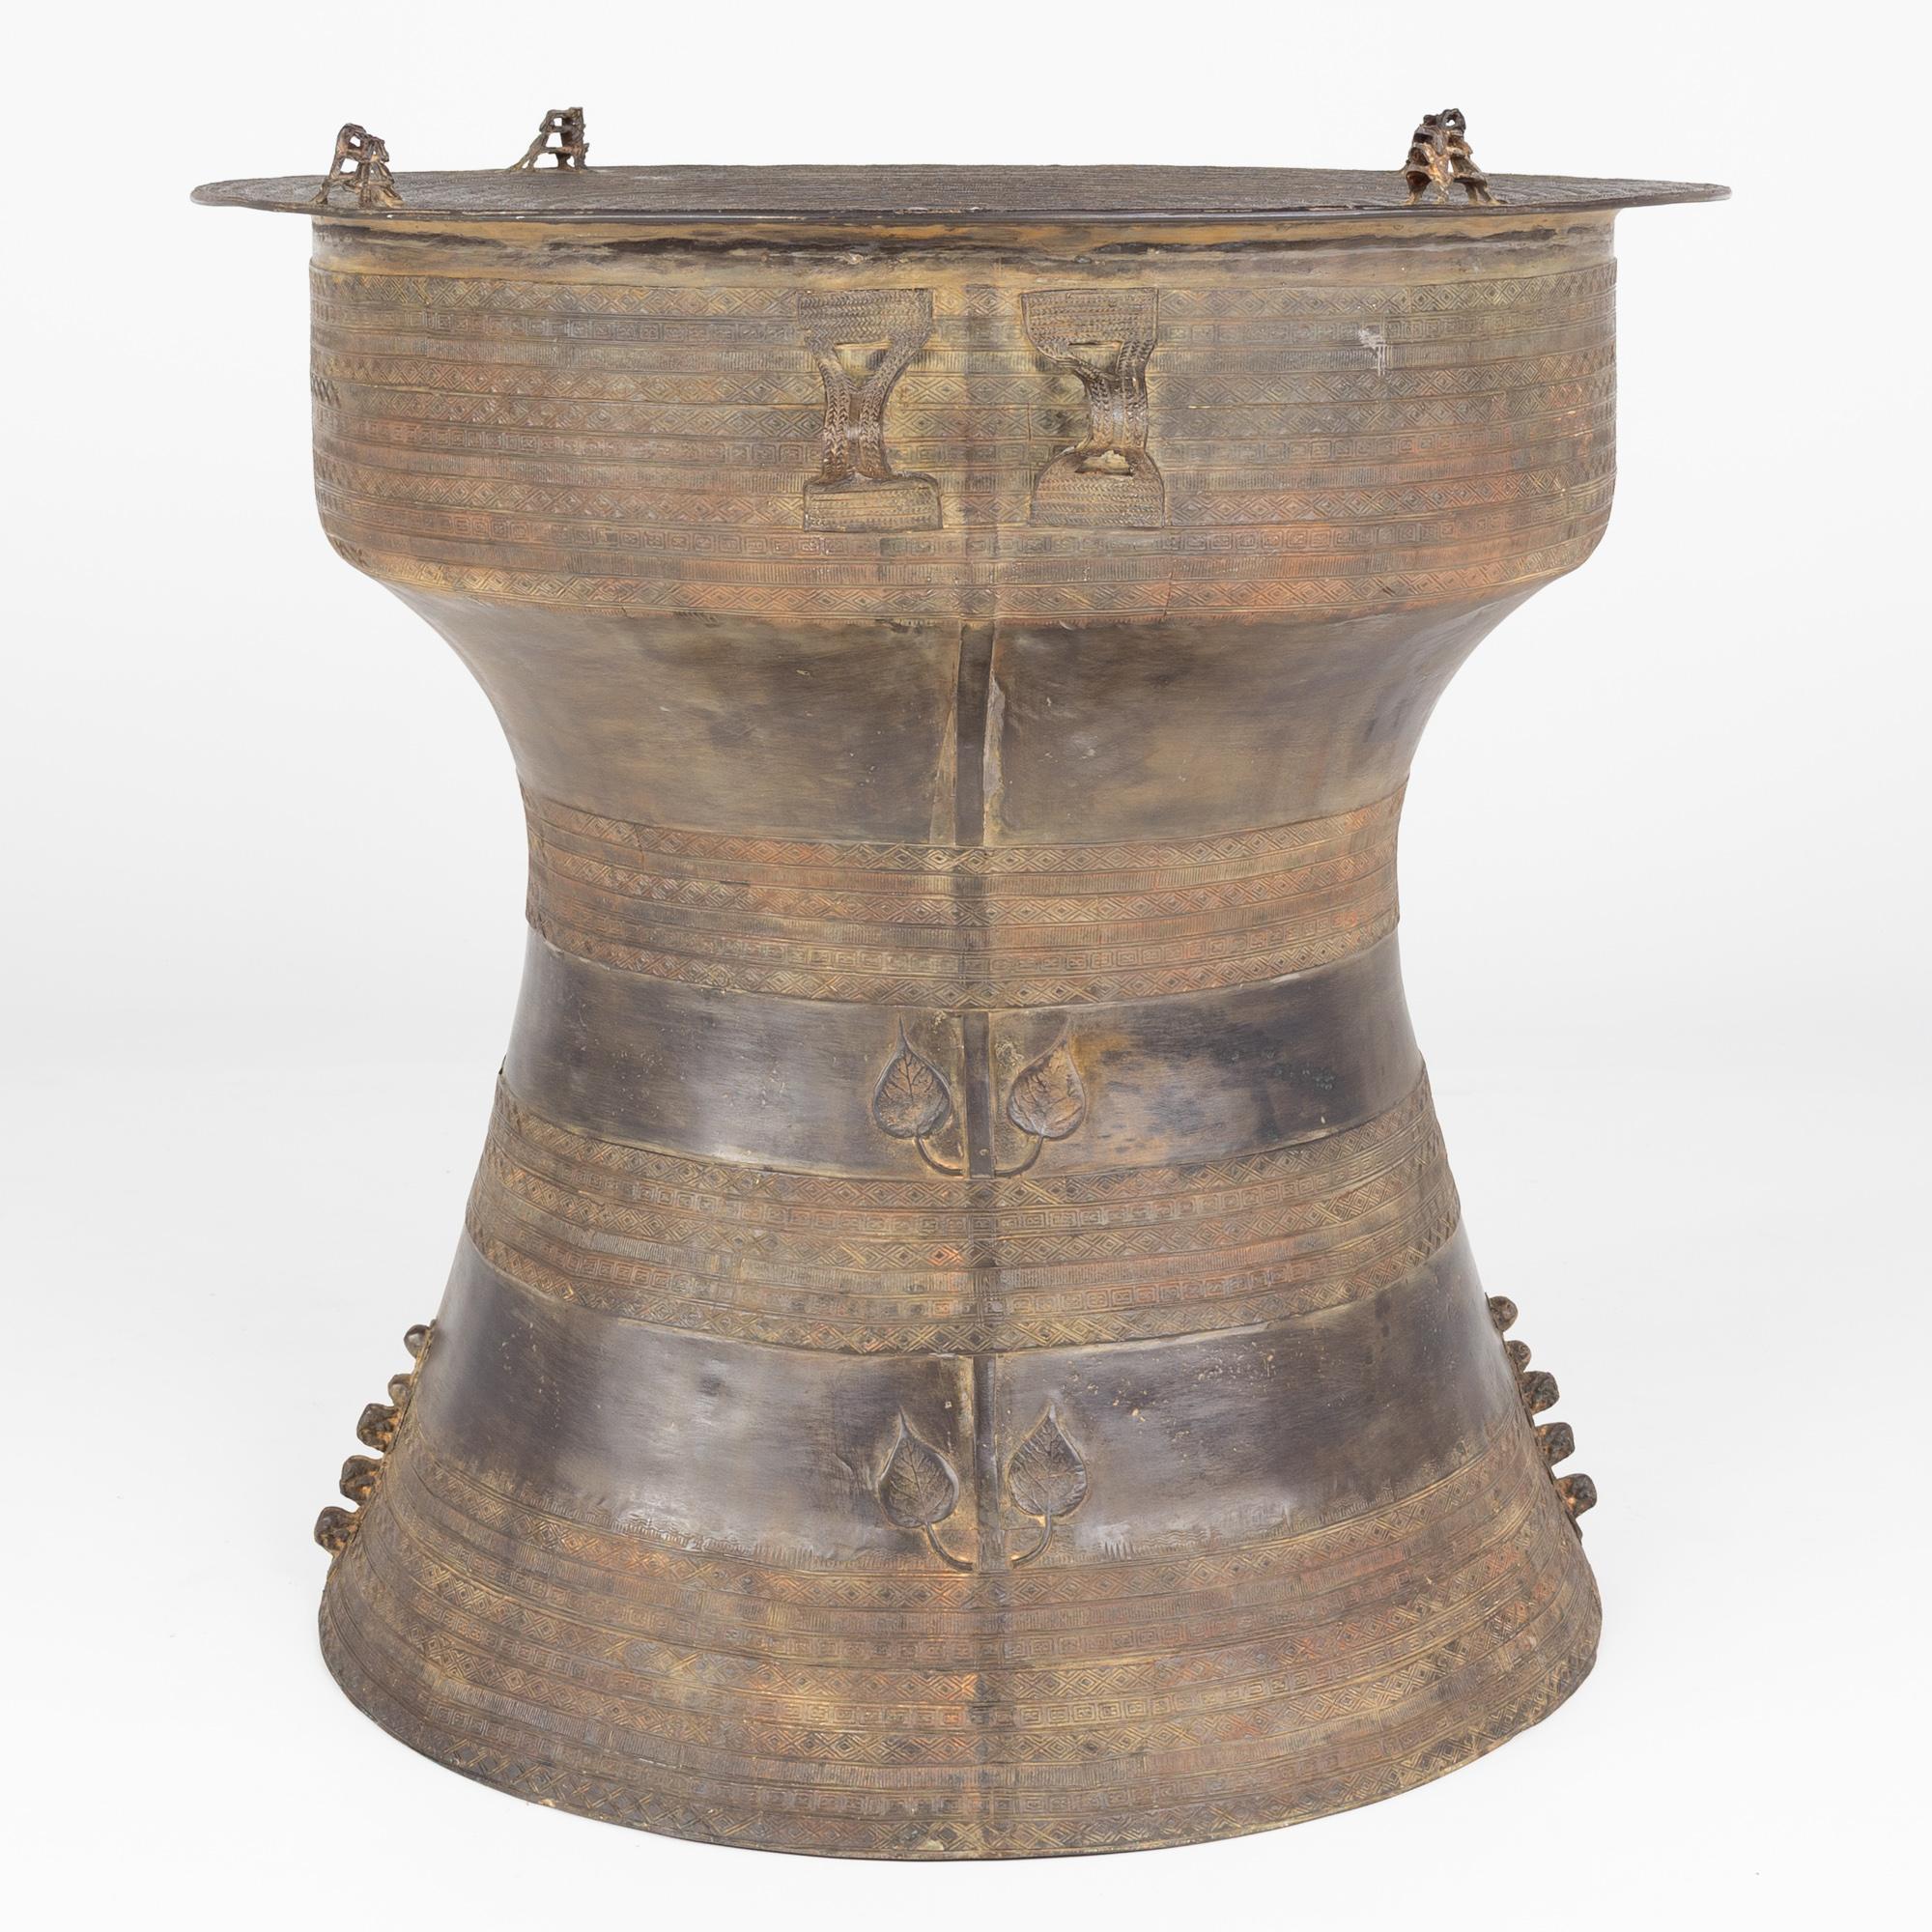 Burmese bronze rain drum side table.

This side table measures: 30 wide x 30 deep x 31 inches high.

This piece is in excellent vintage condtion and very solid with no noticeable damage. It has a natural oxidized / rustic look.

About photos: